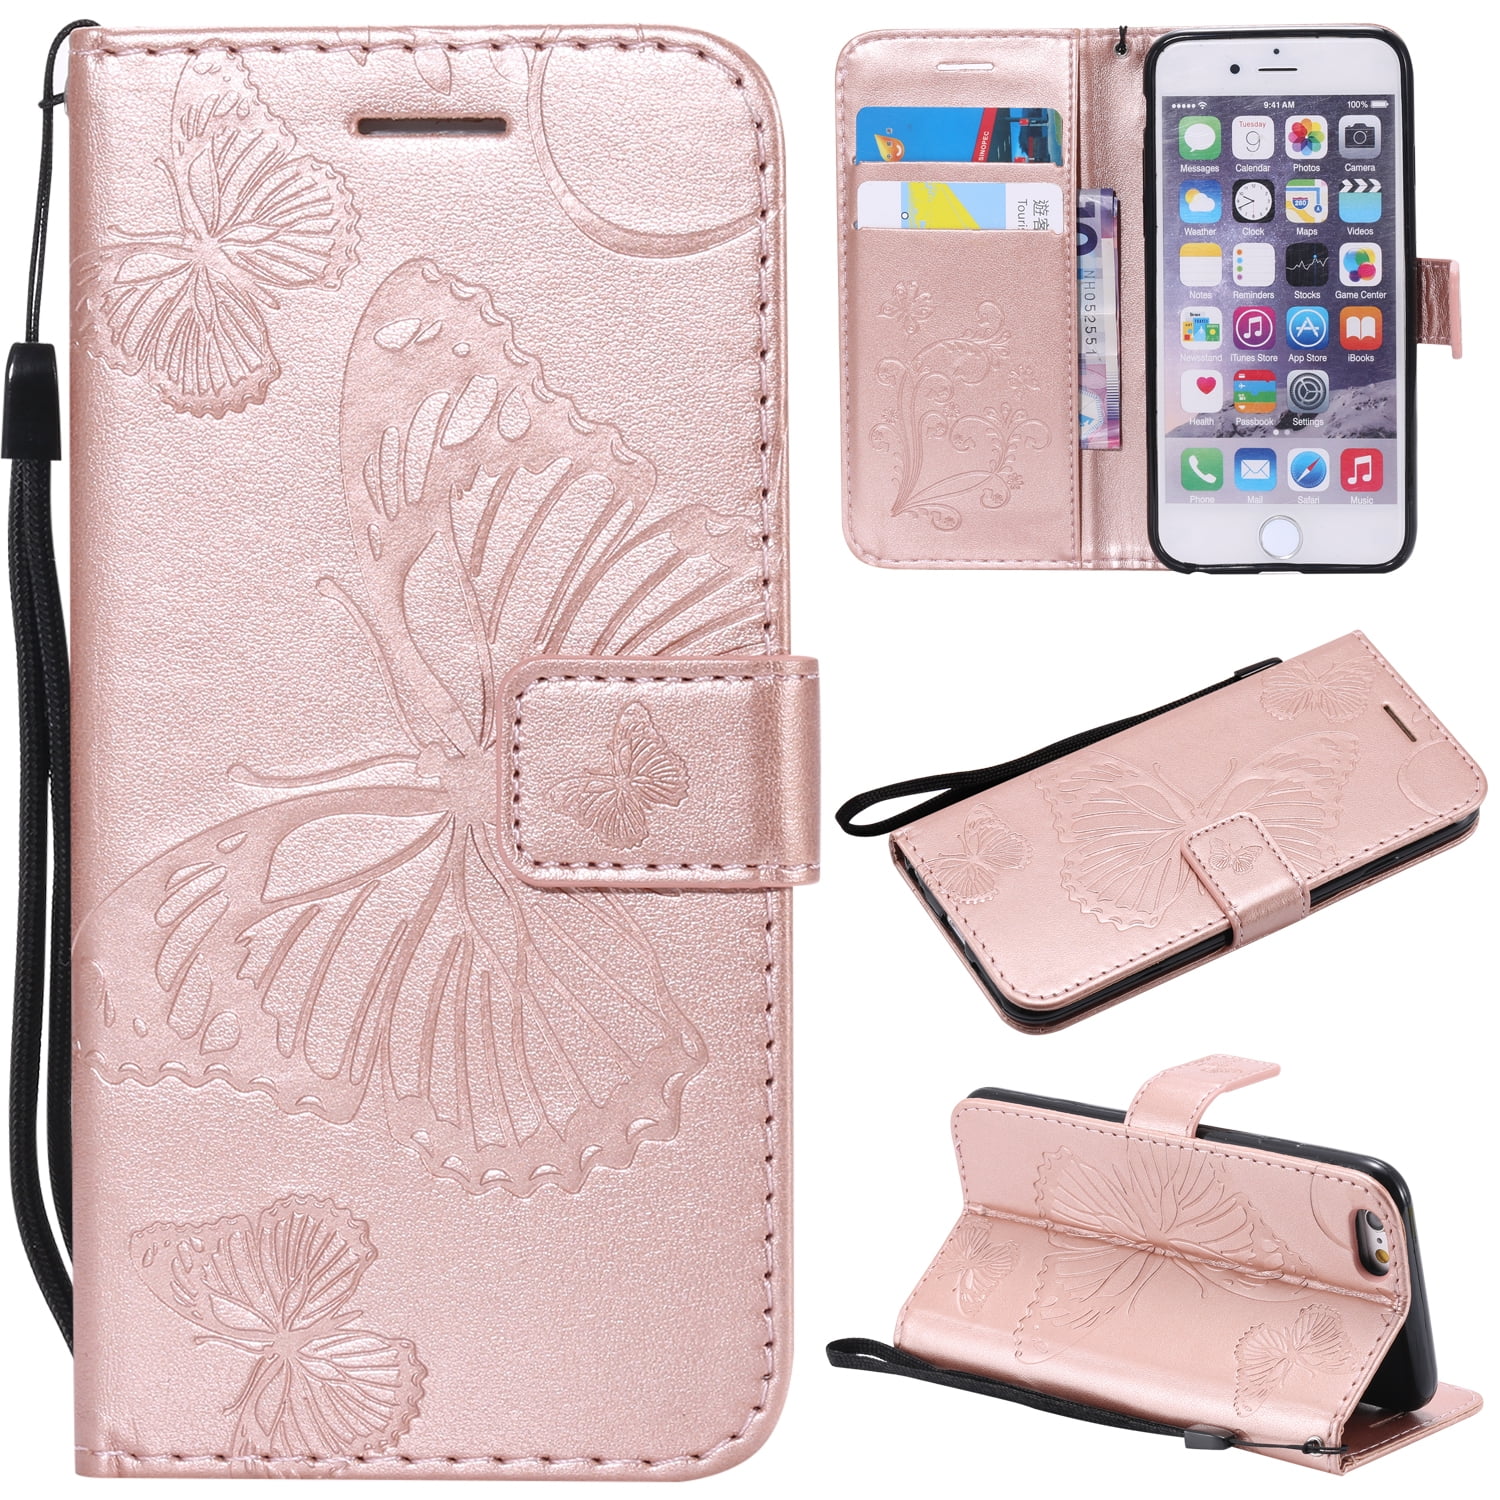 Iphone 6 Plus 6s Plus Wallet Case Allytech Pretty Retro Embossed Butterfly Flower Design Pu Leather Book Style Wallet Flip Case Cover For Apple Iphone 6 Plus And Iphone 6s Plus Rosegold